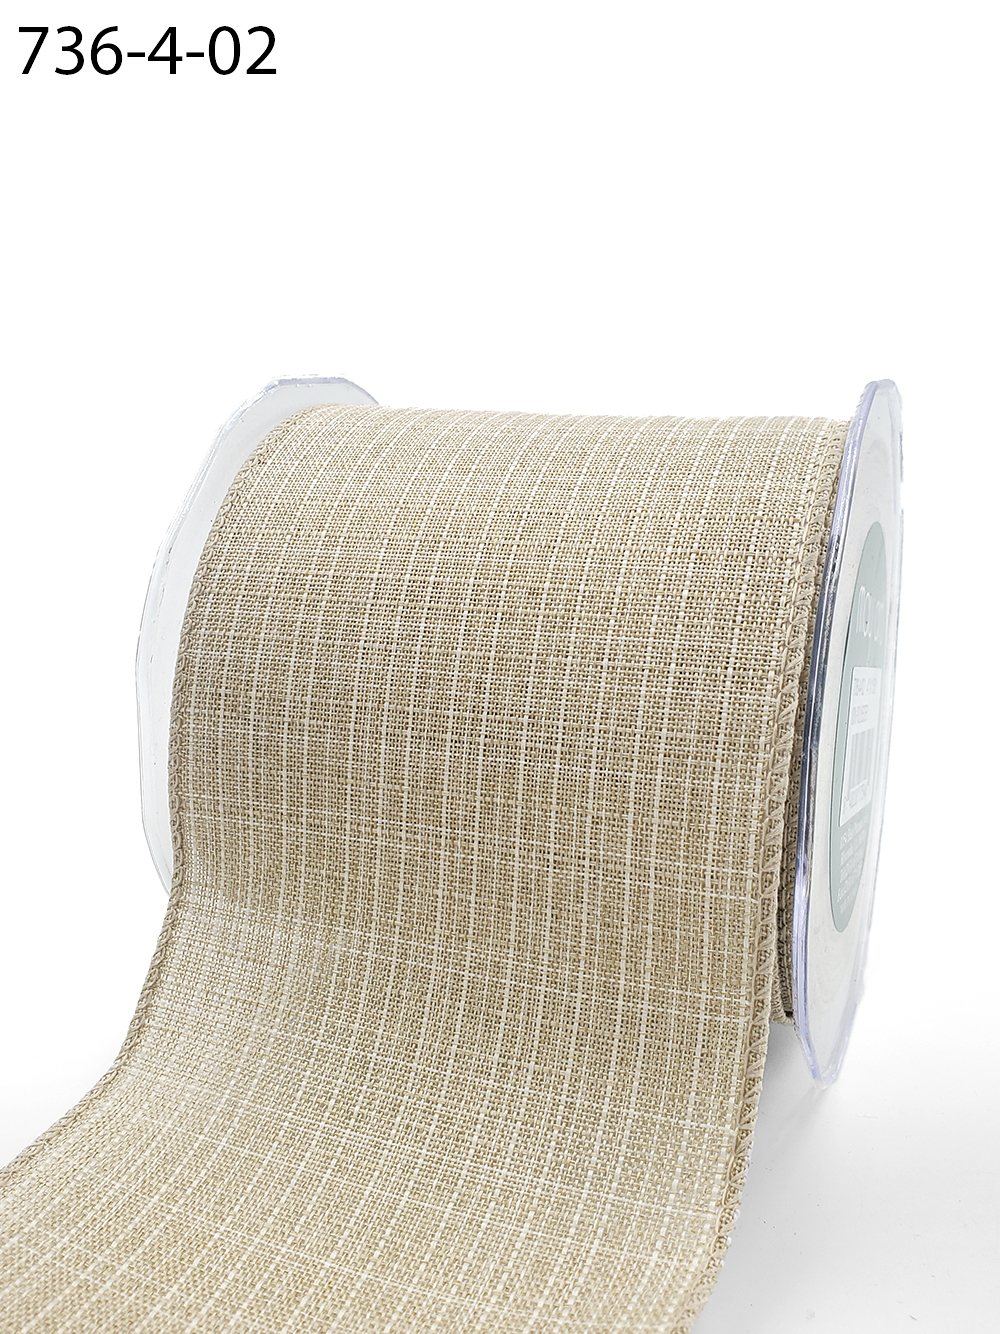 4 Linen Ribbon - 5 Yard (Fringed edges) [T099-02] - $3.70 :  , Burlap for Wedding and Special Events